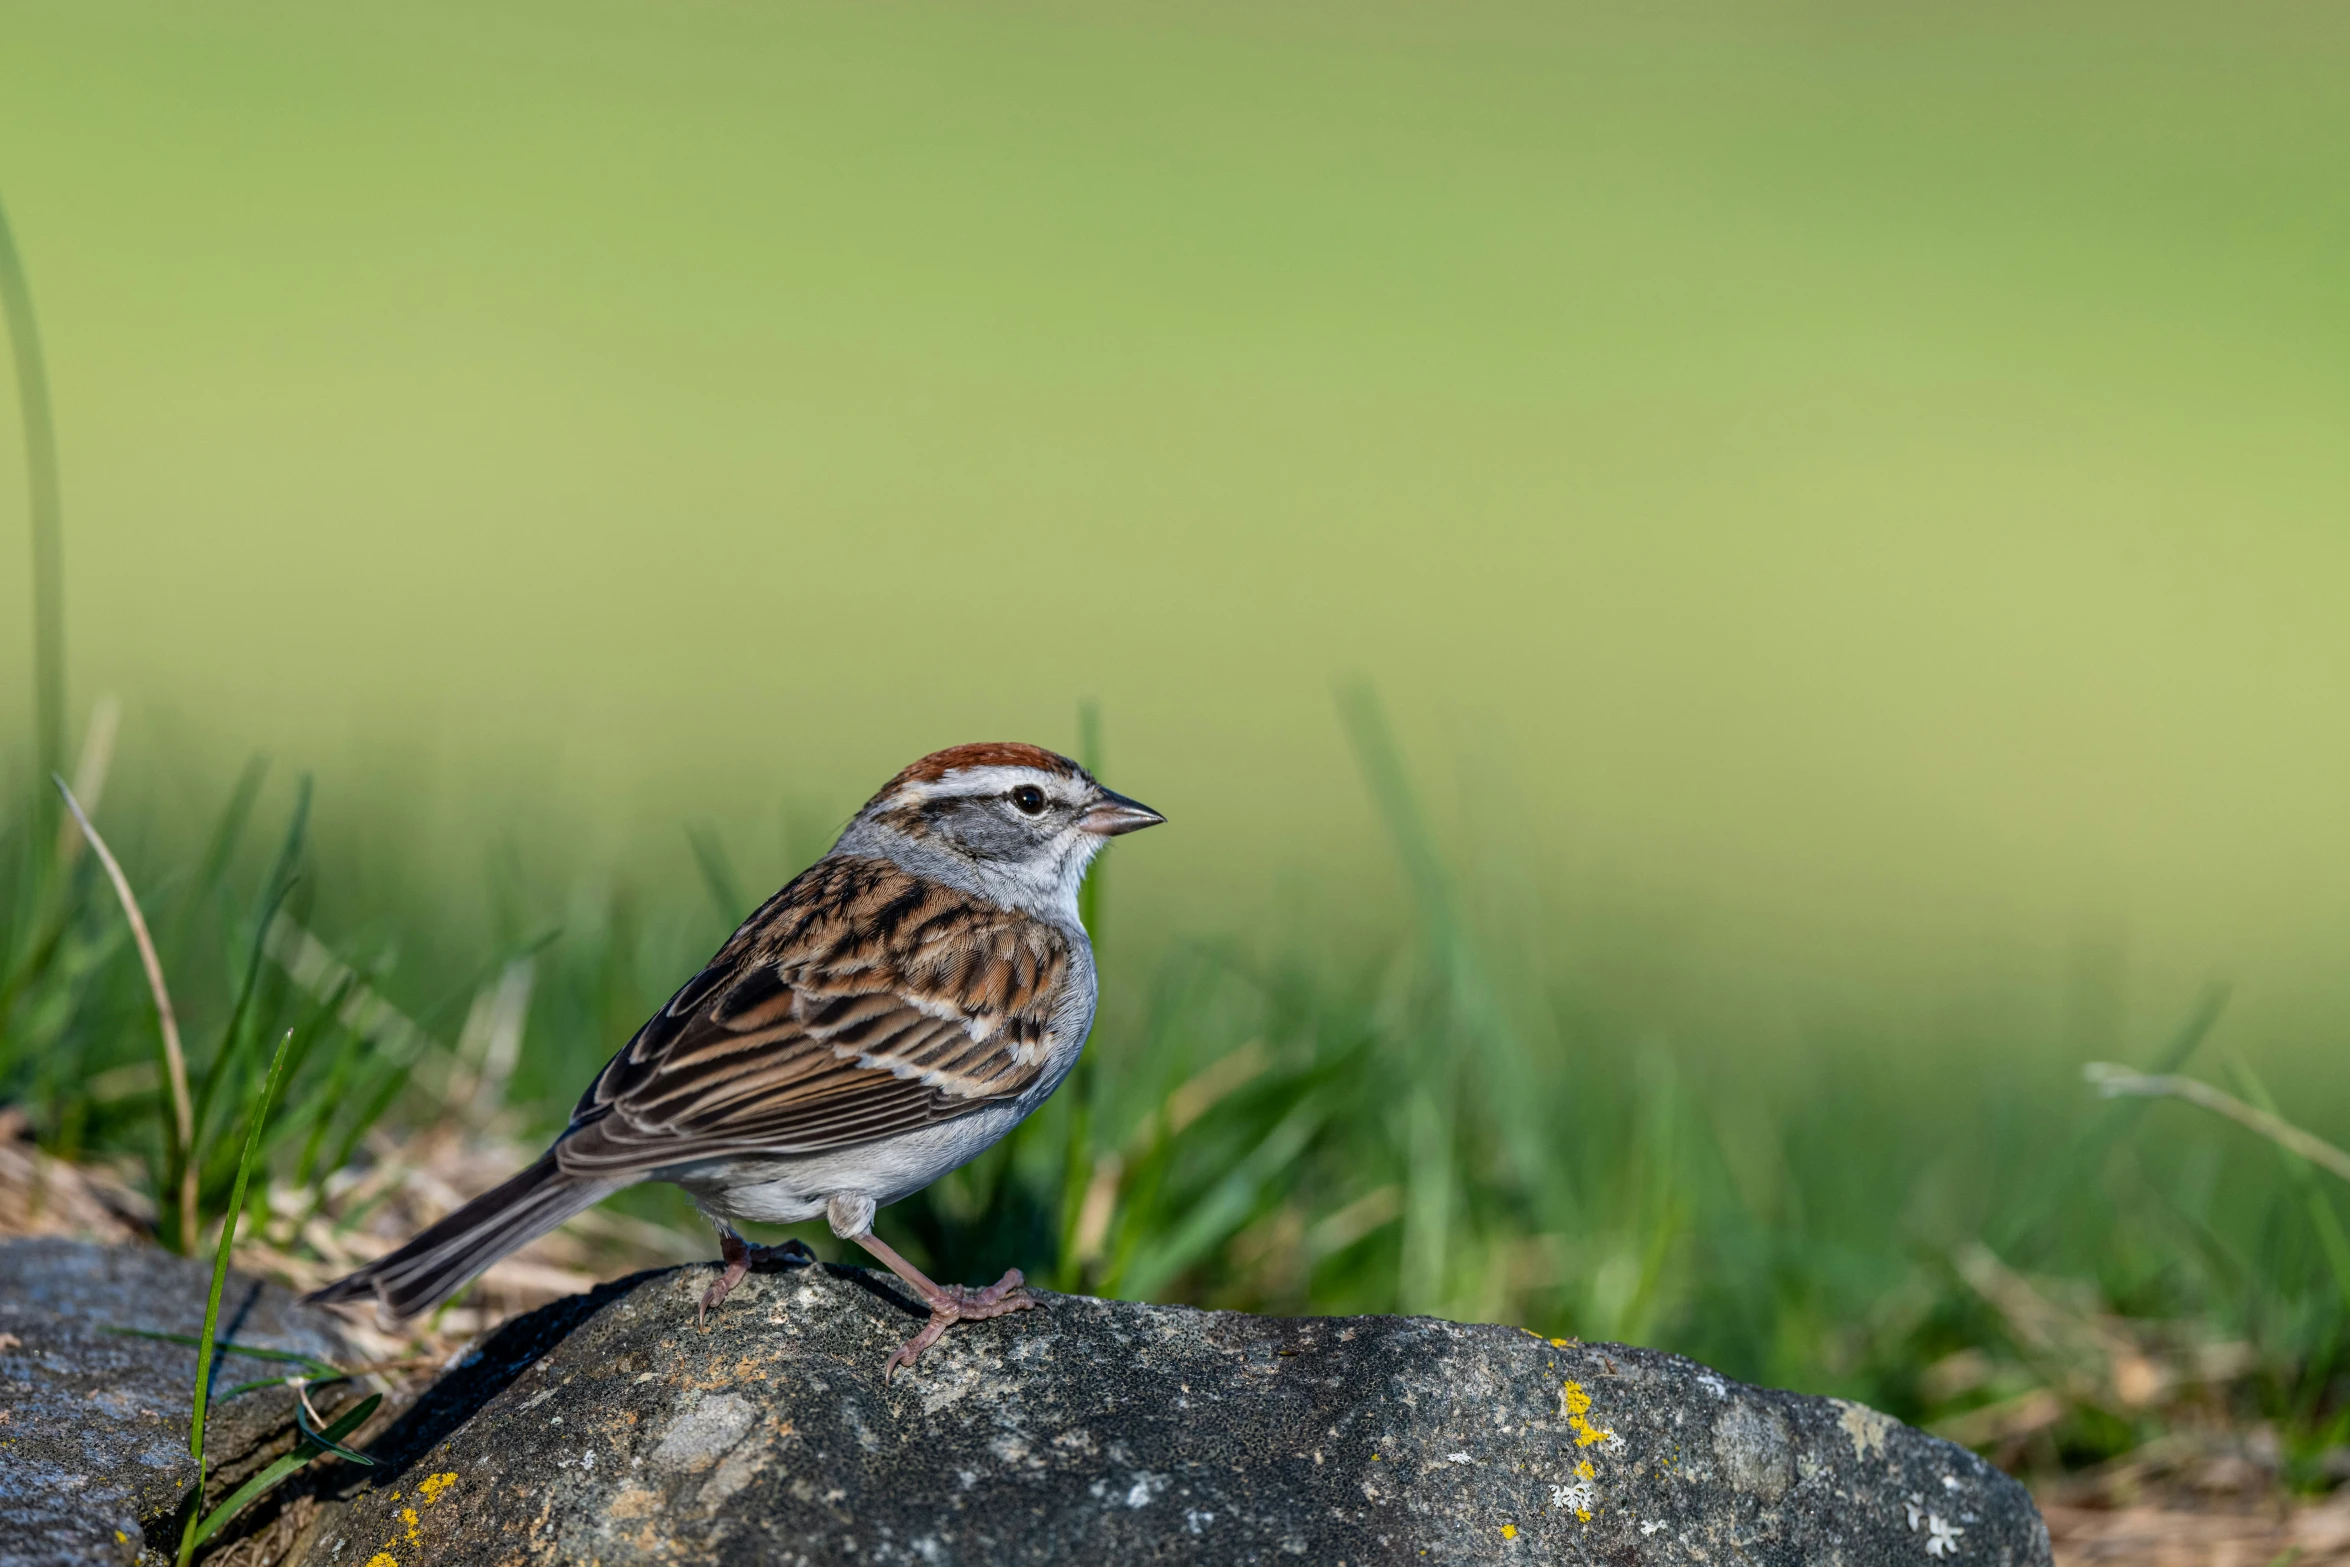 a small bird standing on the ground next to grass